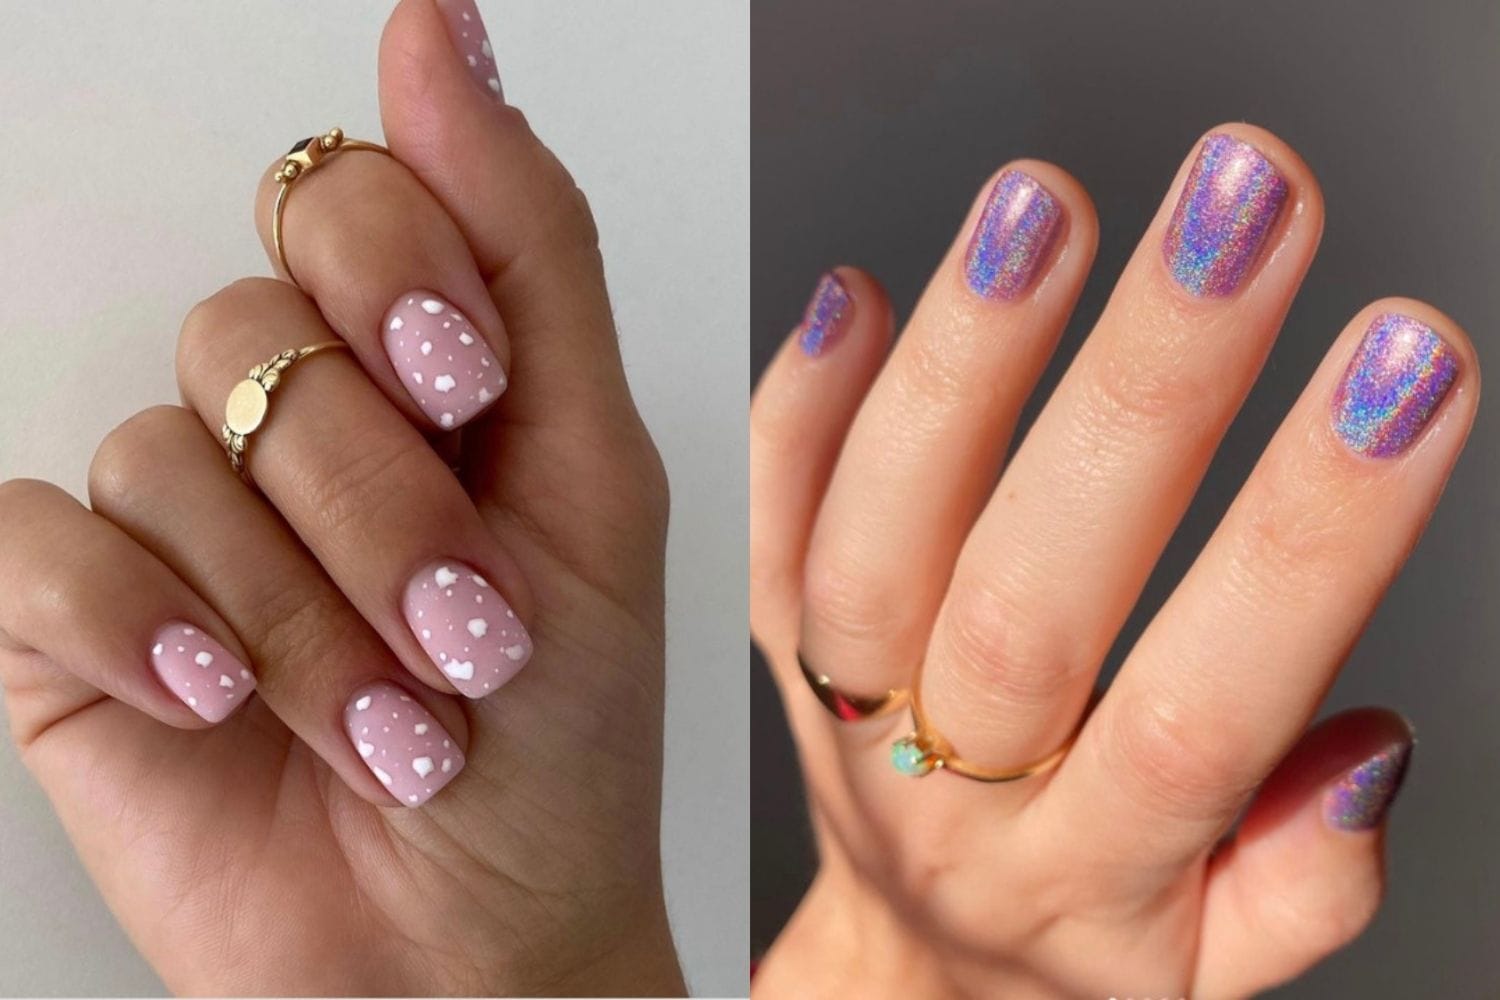 These 16 Gel Short Nail Designs Are Anything But Boring - Let's Eat Cake